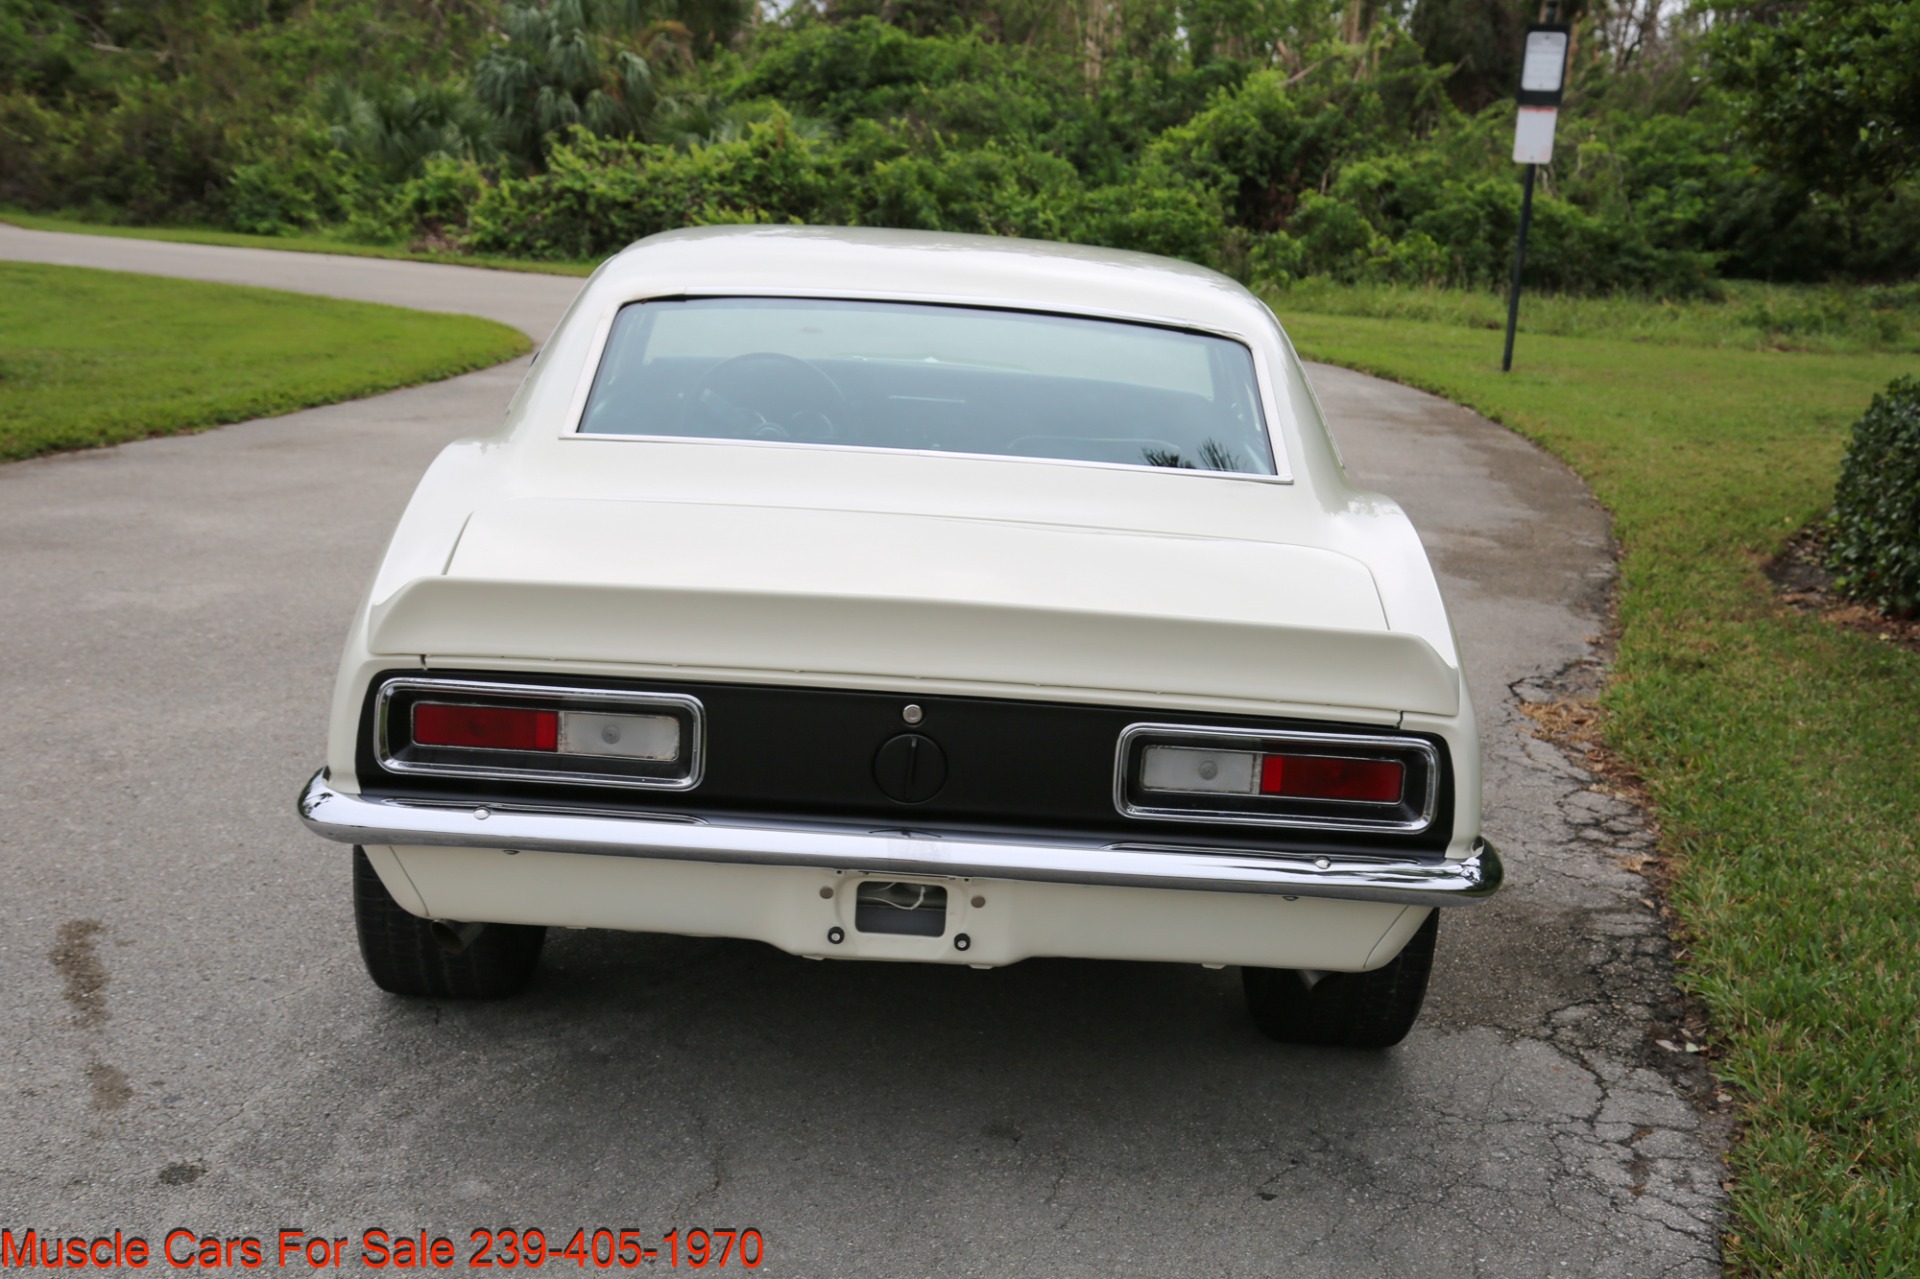 Used 1967 Chevrolet Camaro V8 Manual 12 bolt Rear for sale Sold at Muscle Cars for Sale Inc. in Fort Myers FL 33912 5